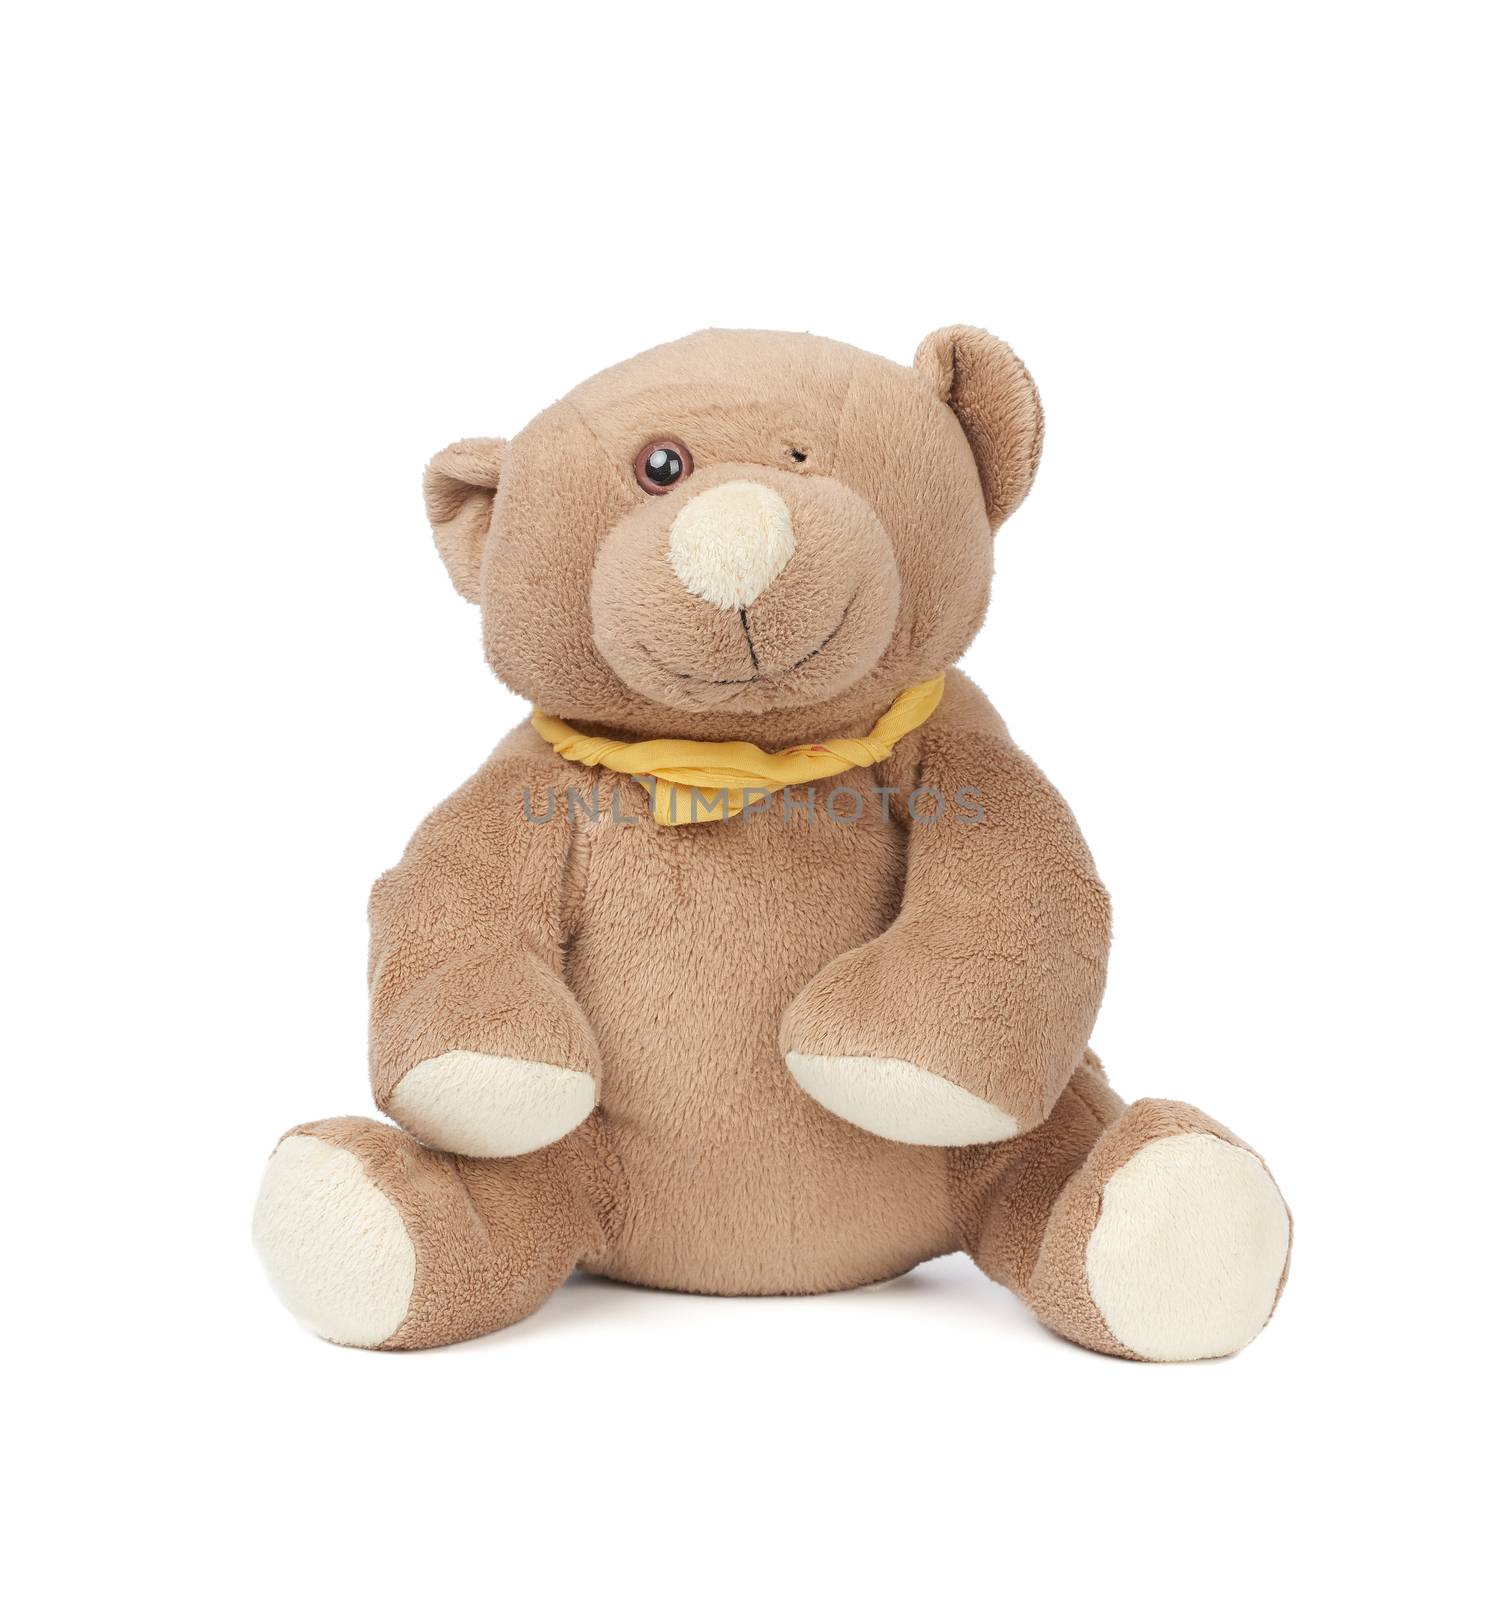 miserable brown teddy bear sitting on a white isolated background, children's toy without an eye